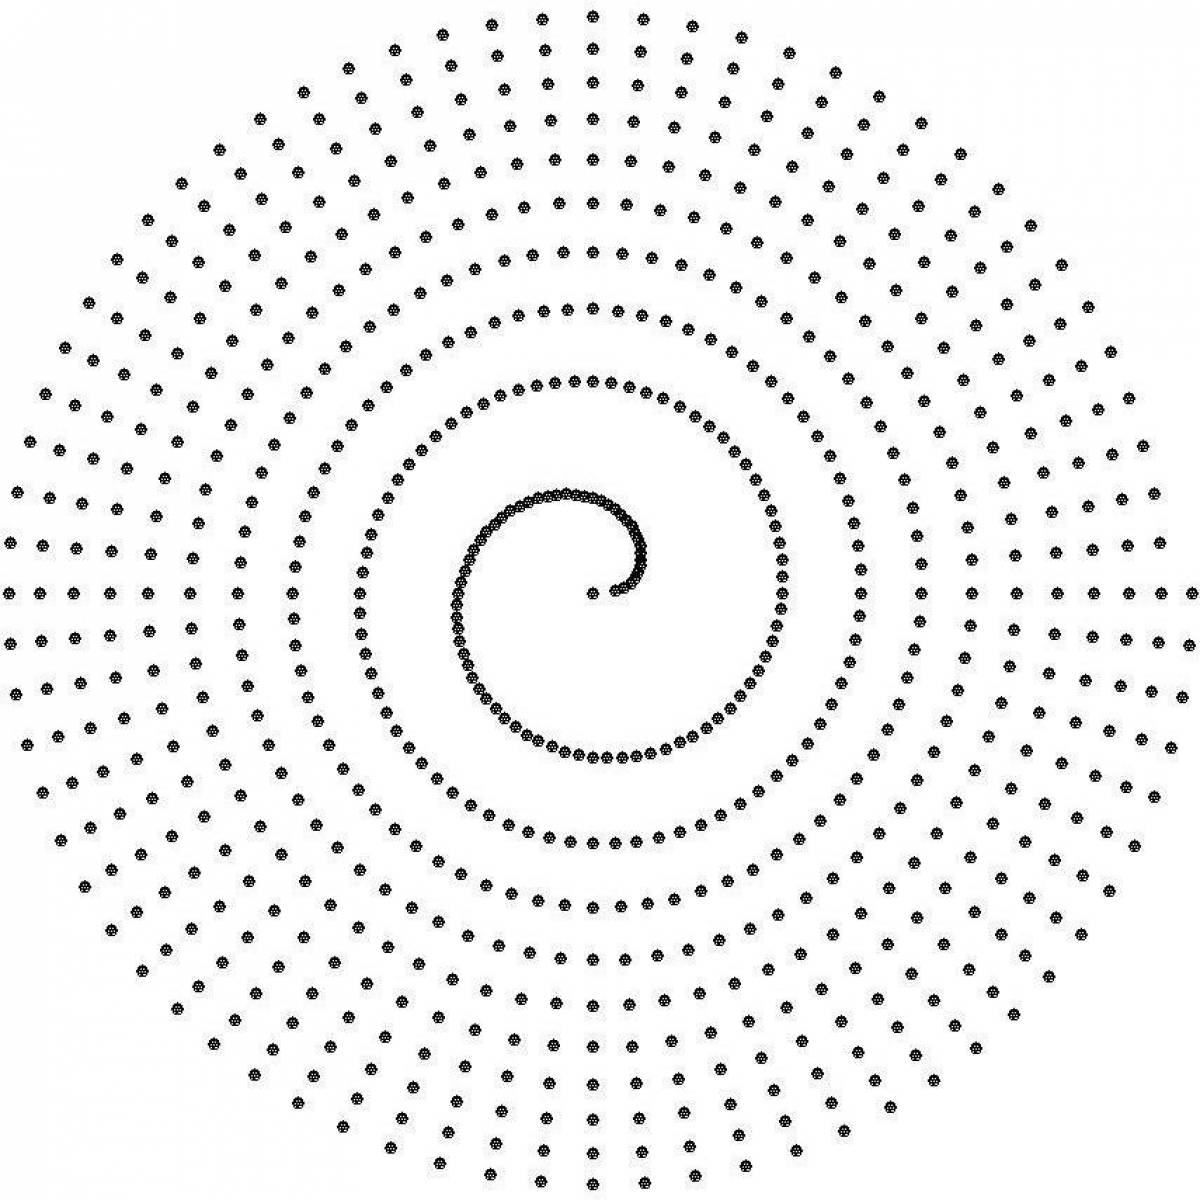 Fancy coloring in a circle in a spiral